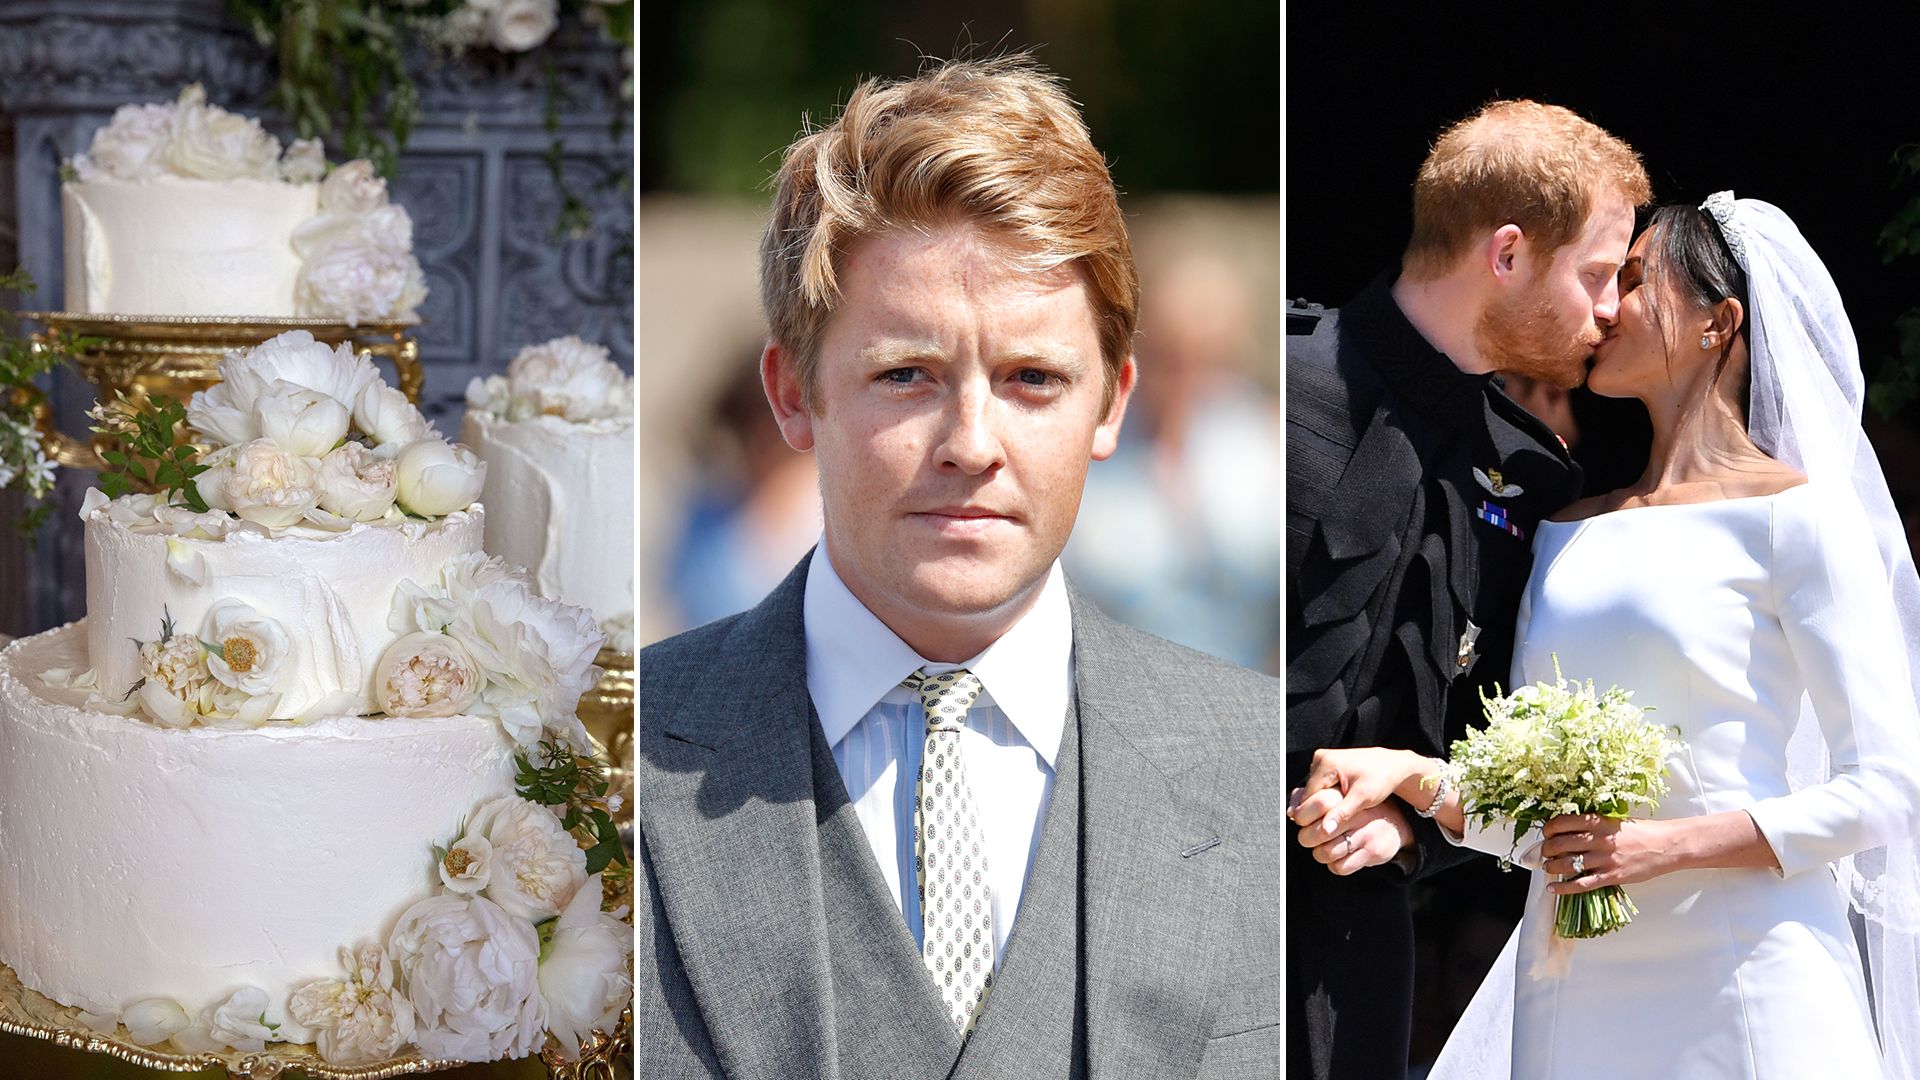 Exclusive: Duke of Westminster's wedding cake takes notes from 'close friend' Prince Harry